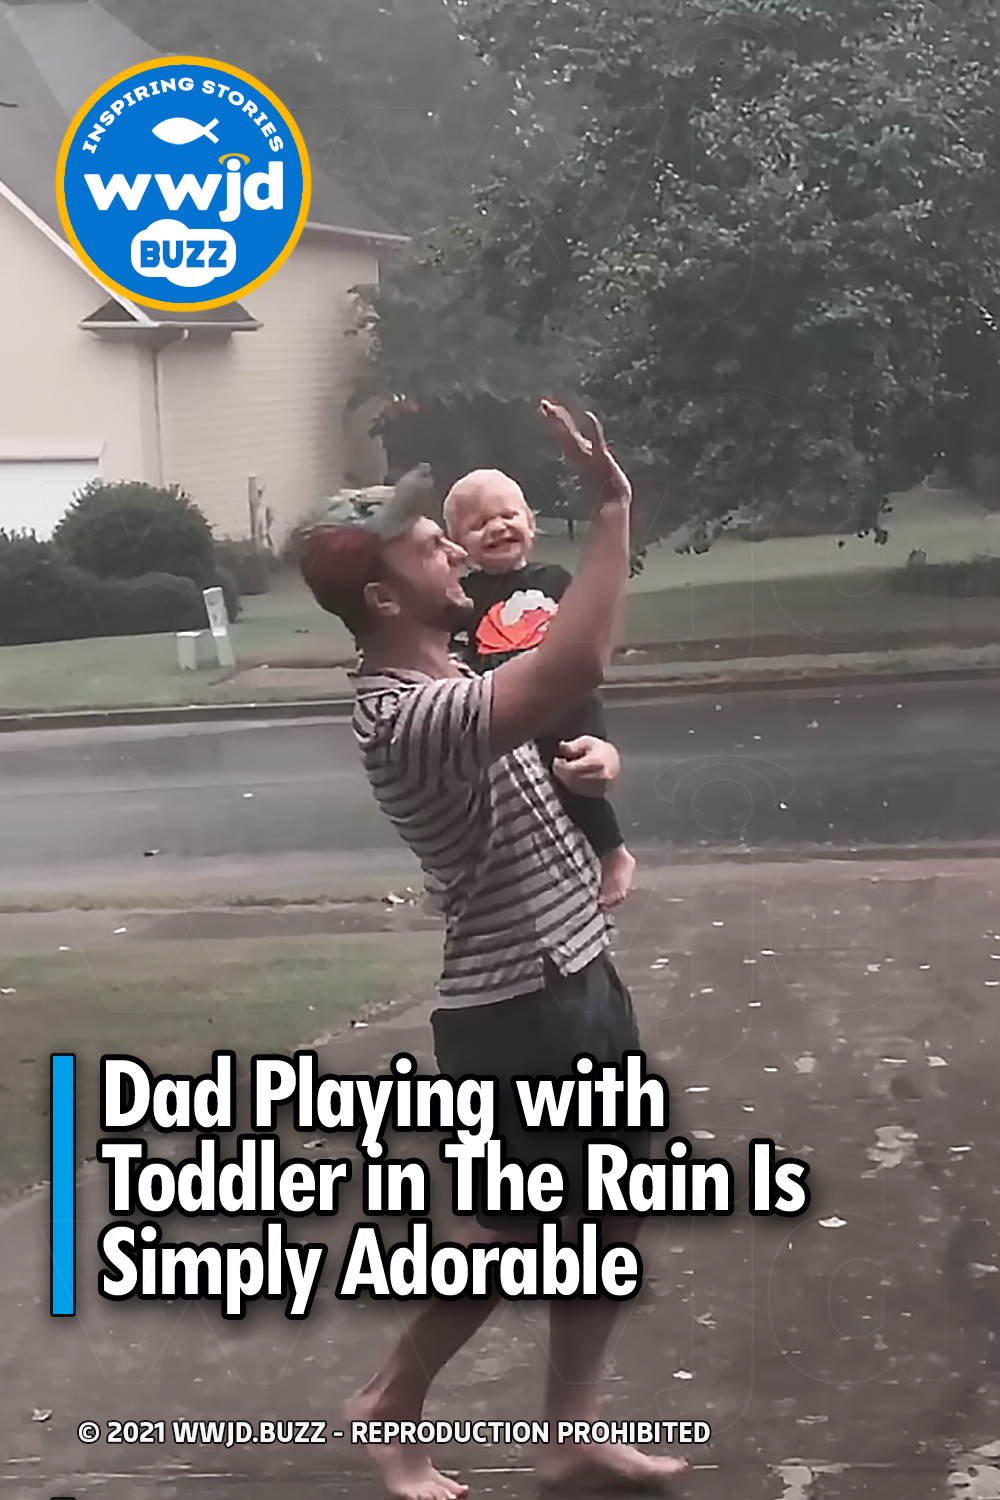 Dad Playing with Toddler in The Rain Is Simply Adorable